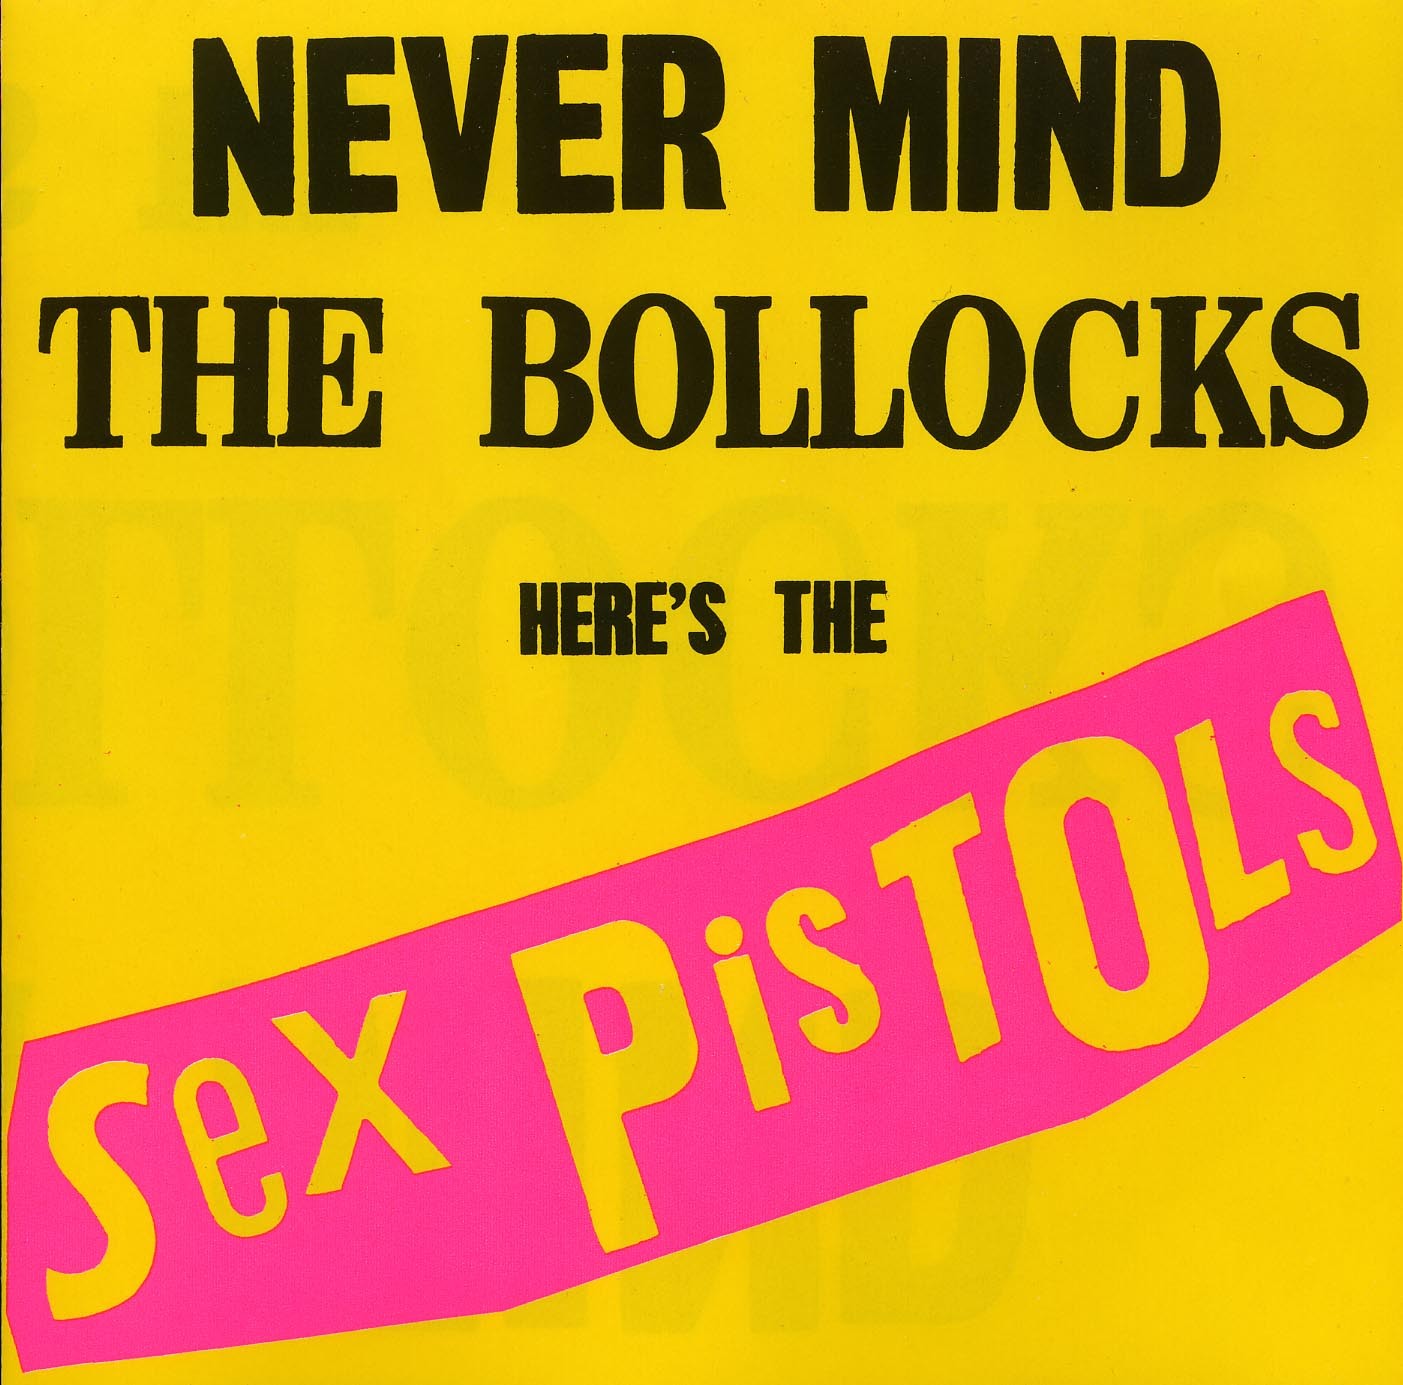 Sex Pistols - Never Mind The Bollocks Here's The Sex Pistols Front